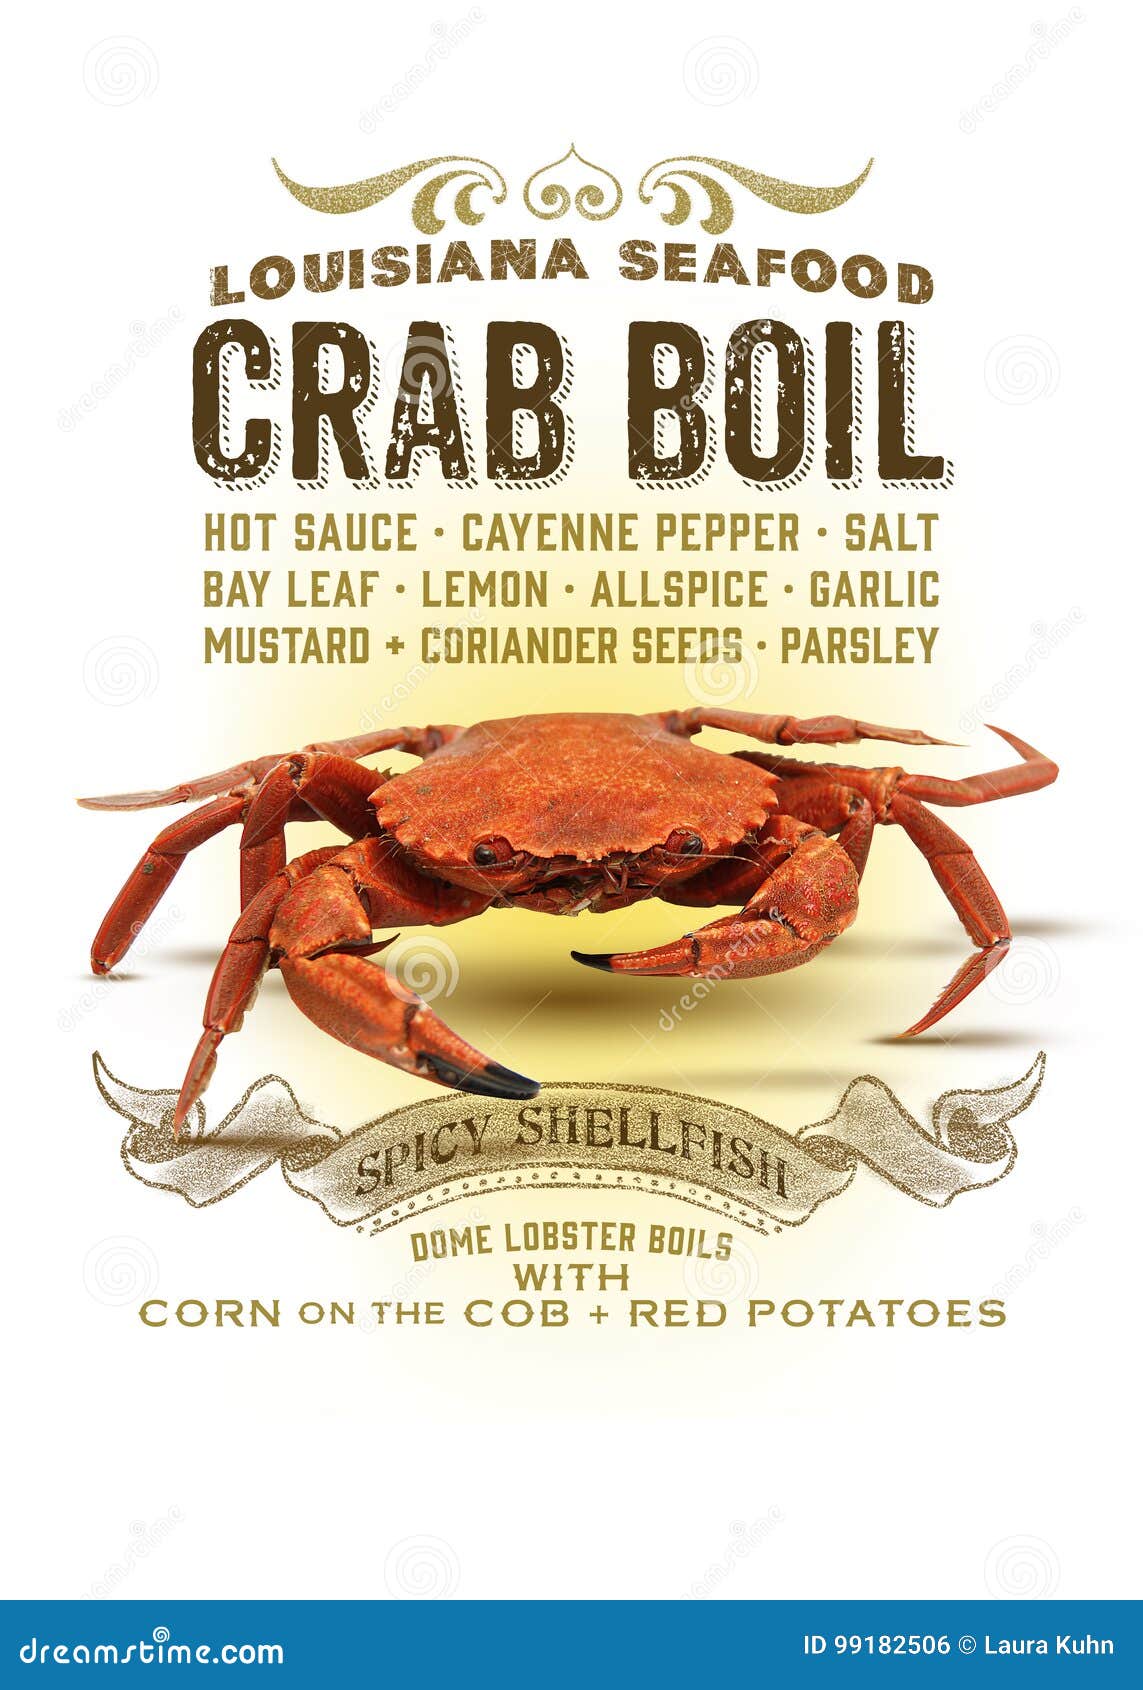 new orleans culture collection crab boil